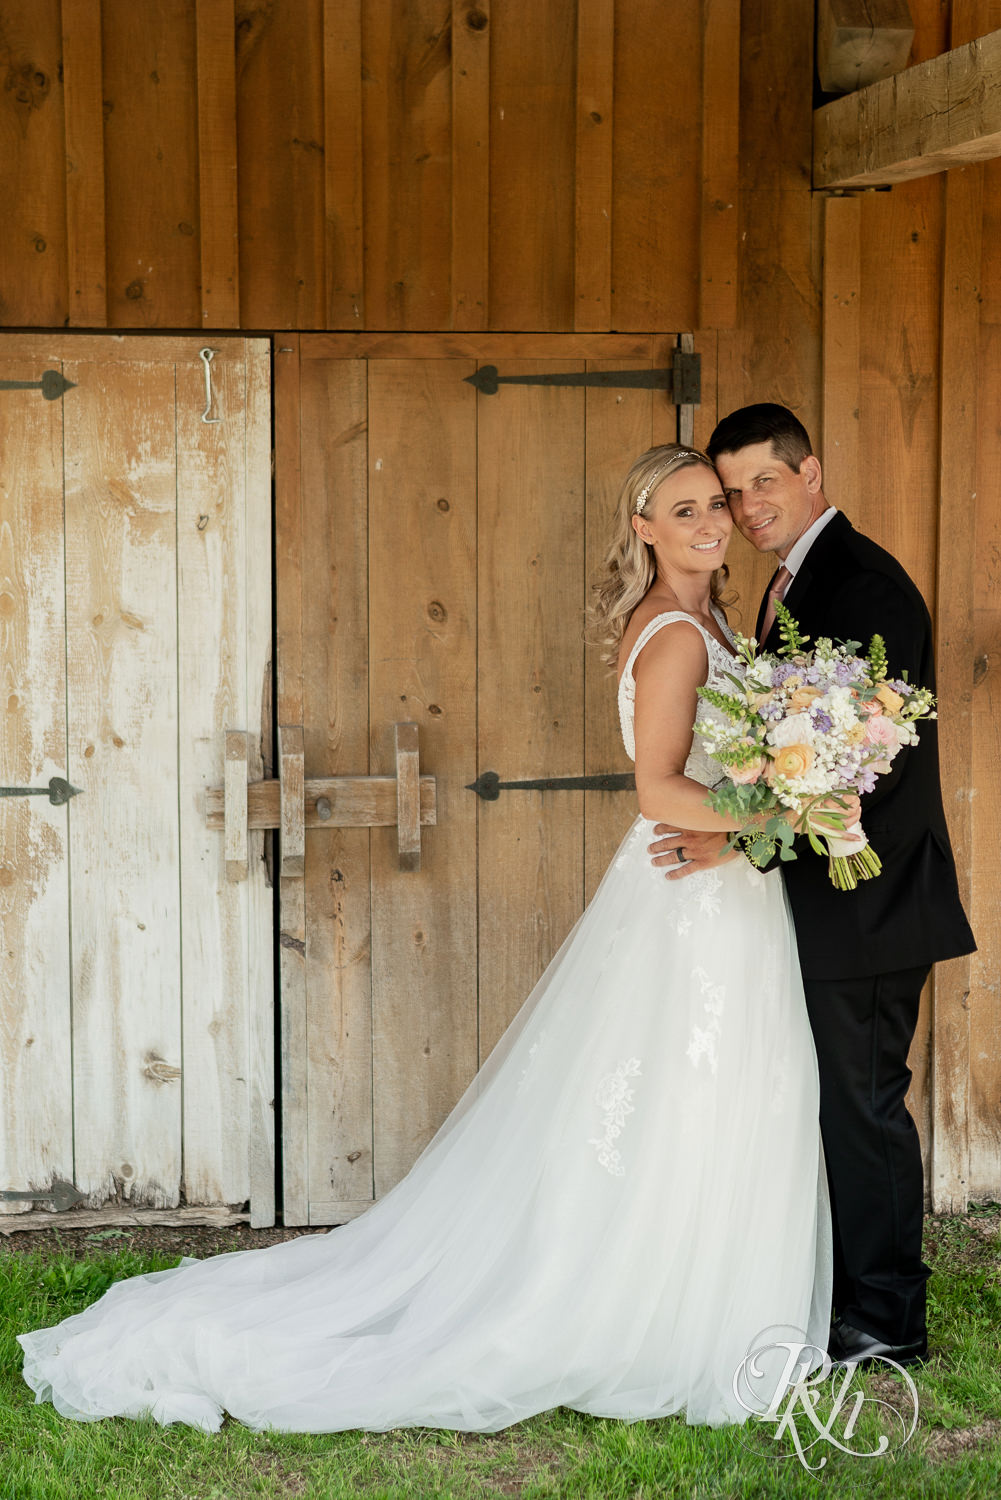 Bride and groom at The Outpost Center in Chaska, Minnesota.